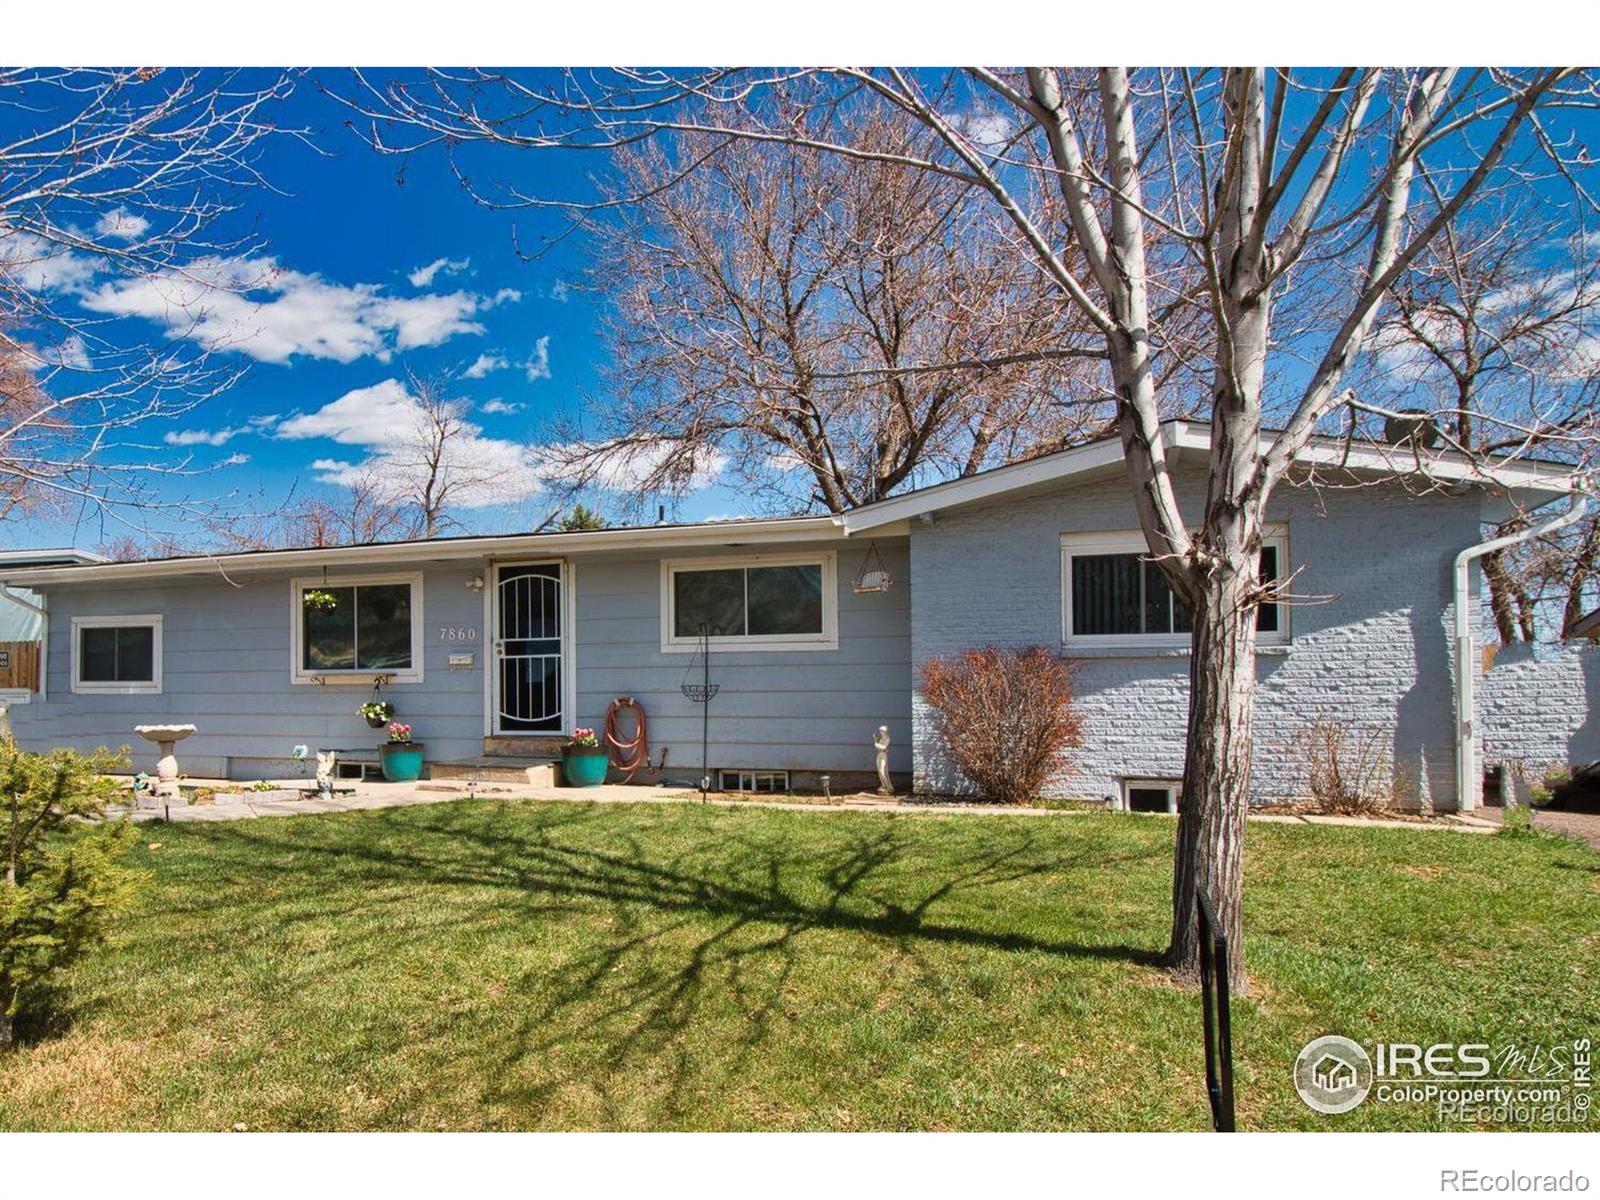 7860  Valley View Drive, denver MLS: 4567891005789 Beds: 4 Baths: 2 Price: $529,900